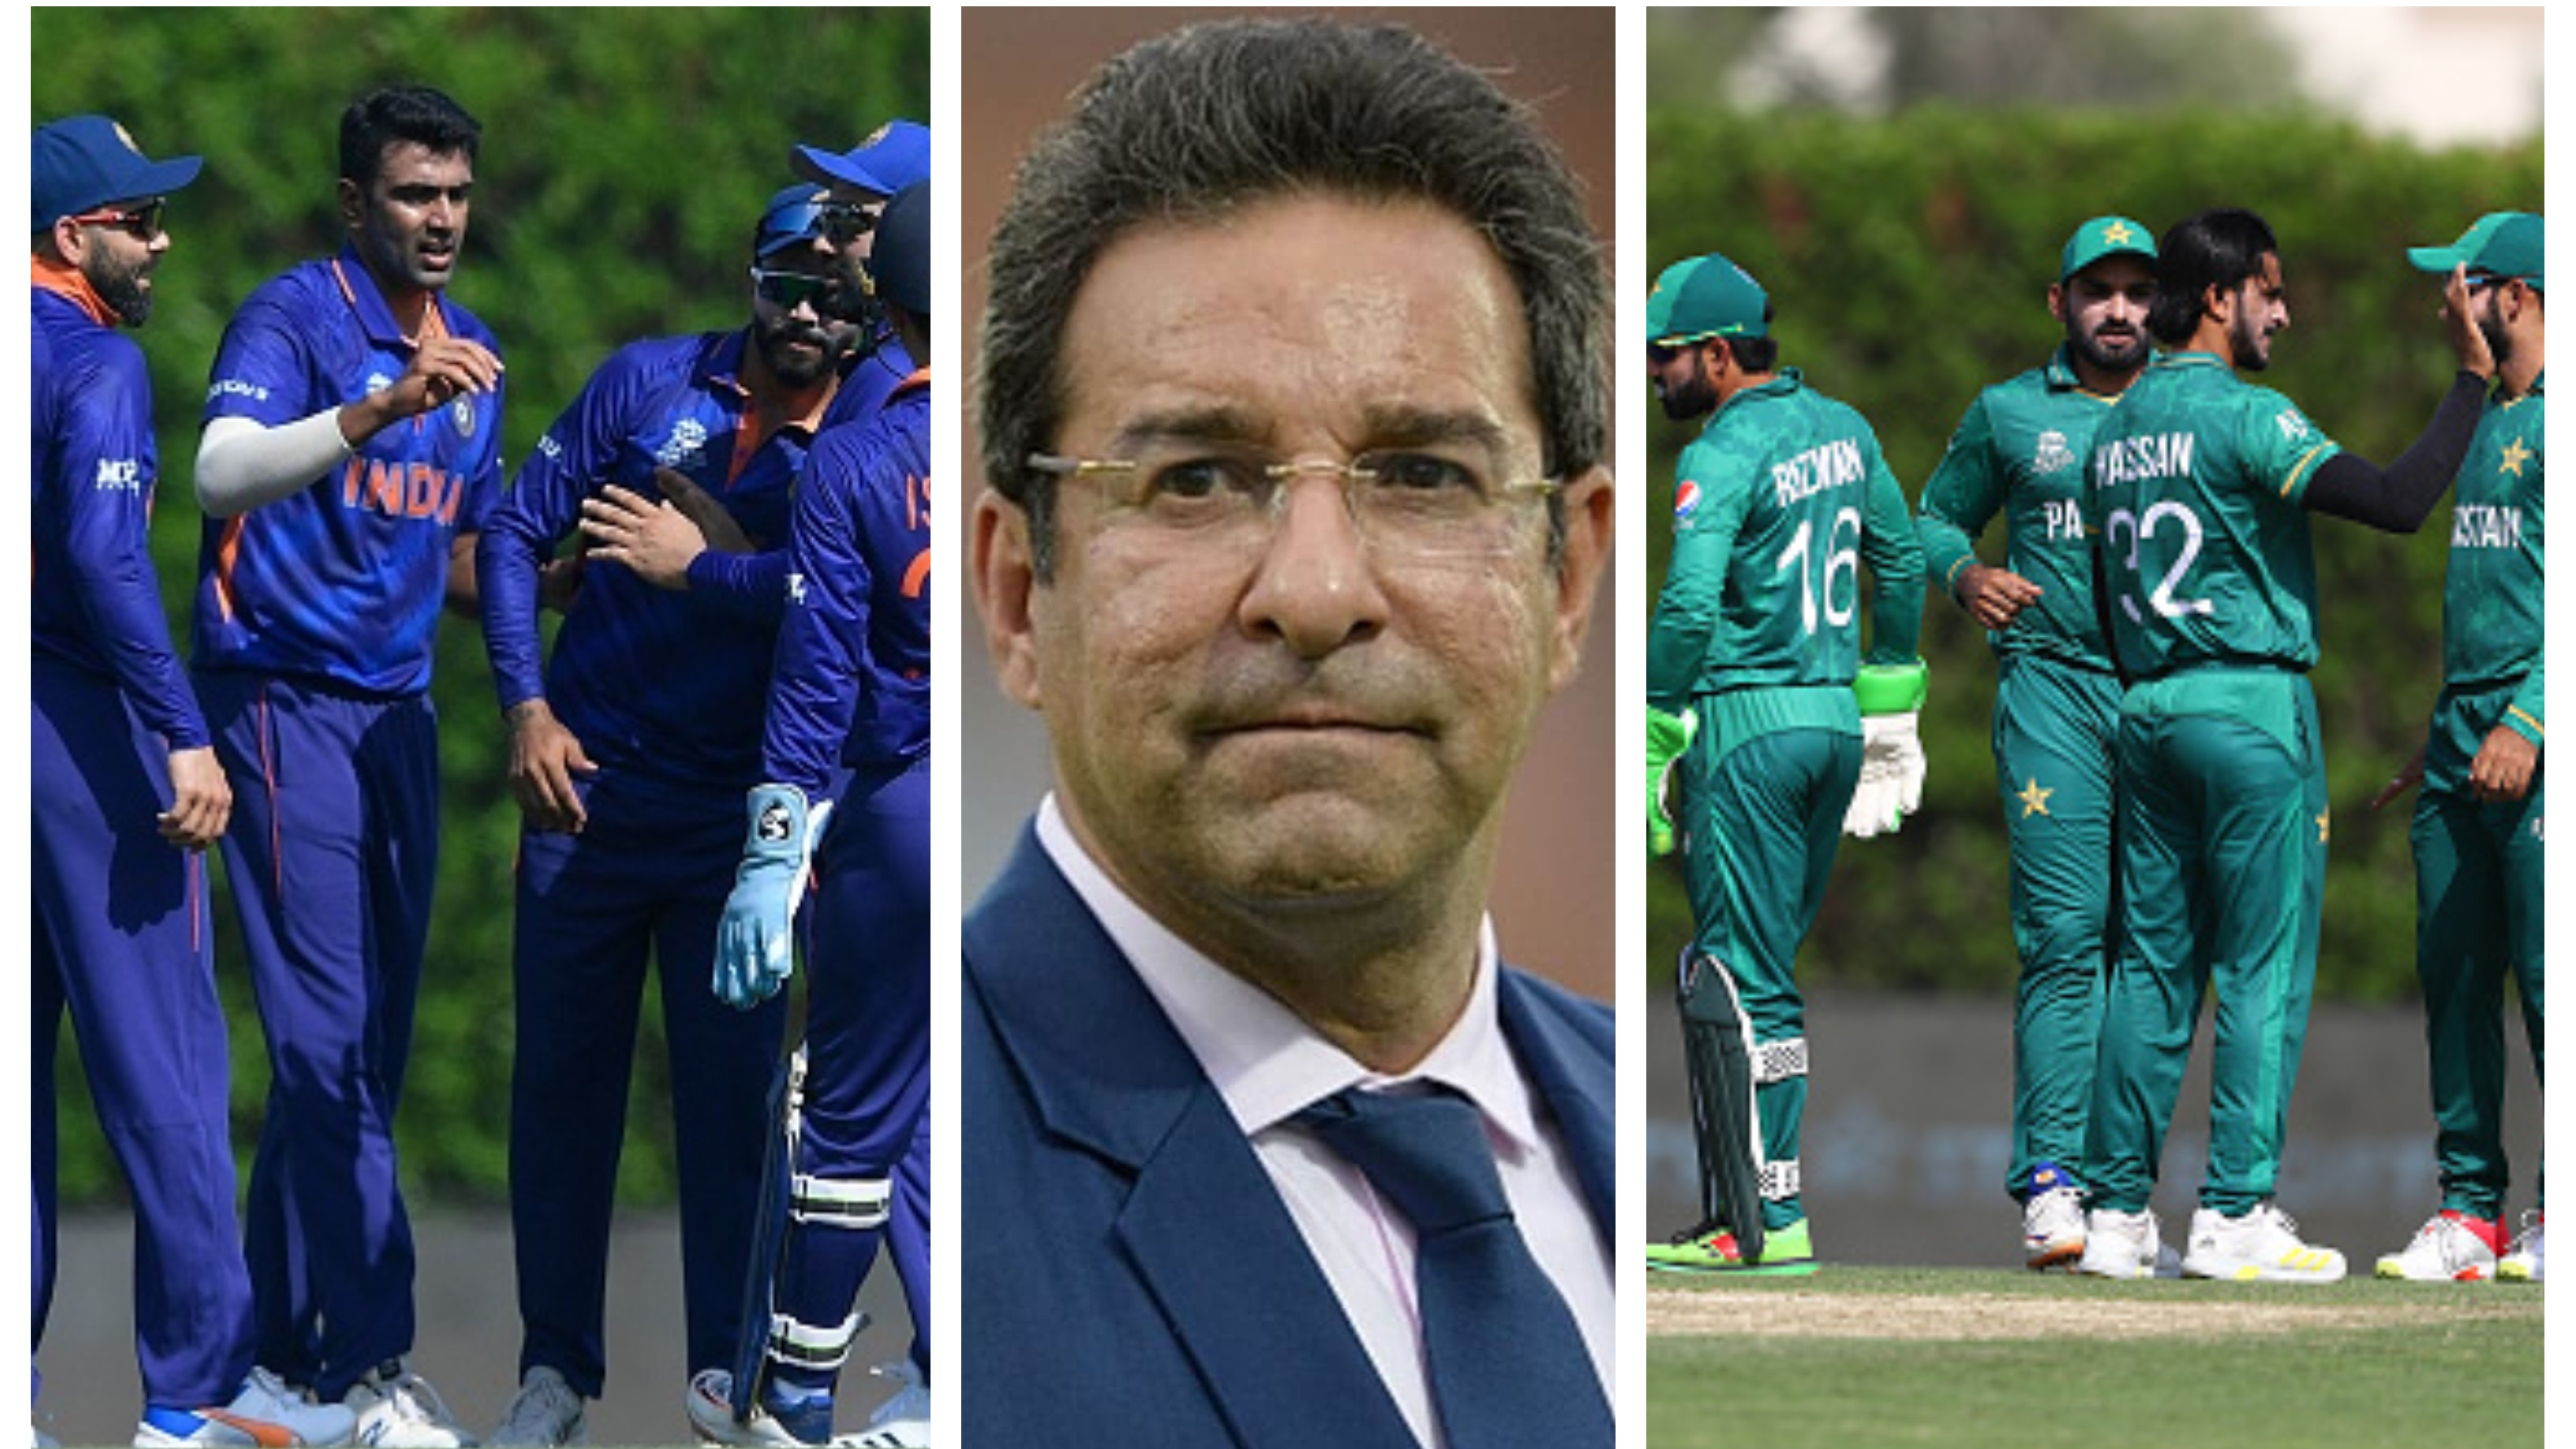 T20 World Cup 2021: ‘It doesn't bother Pakistan or Indian player’, Wasim Akram on India’s clean record over Pakistan